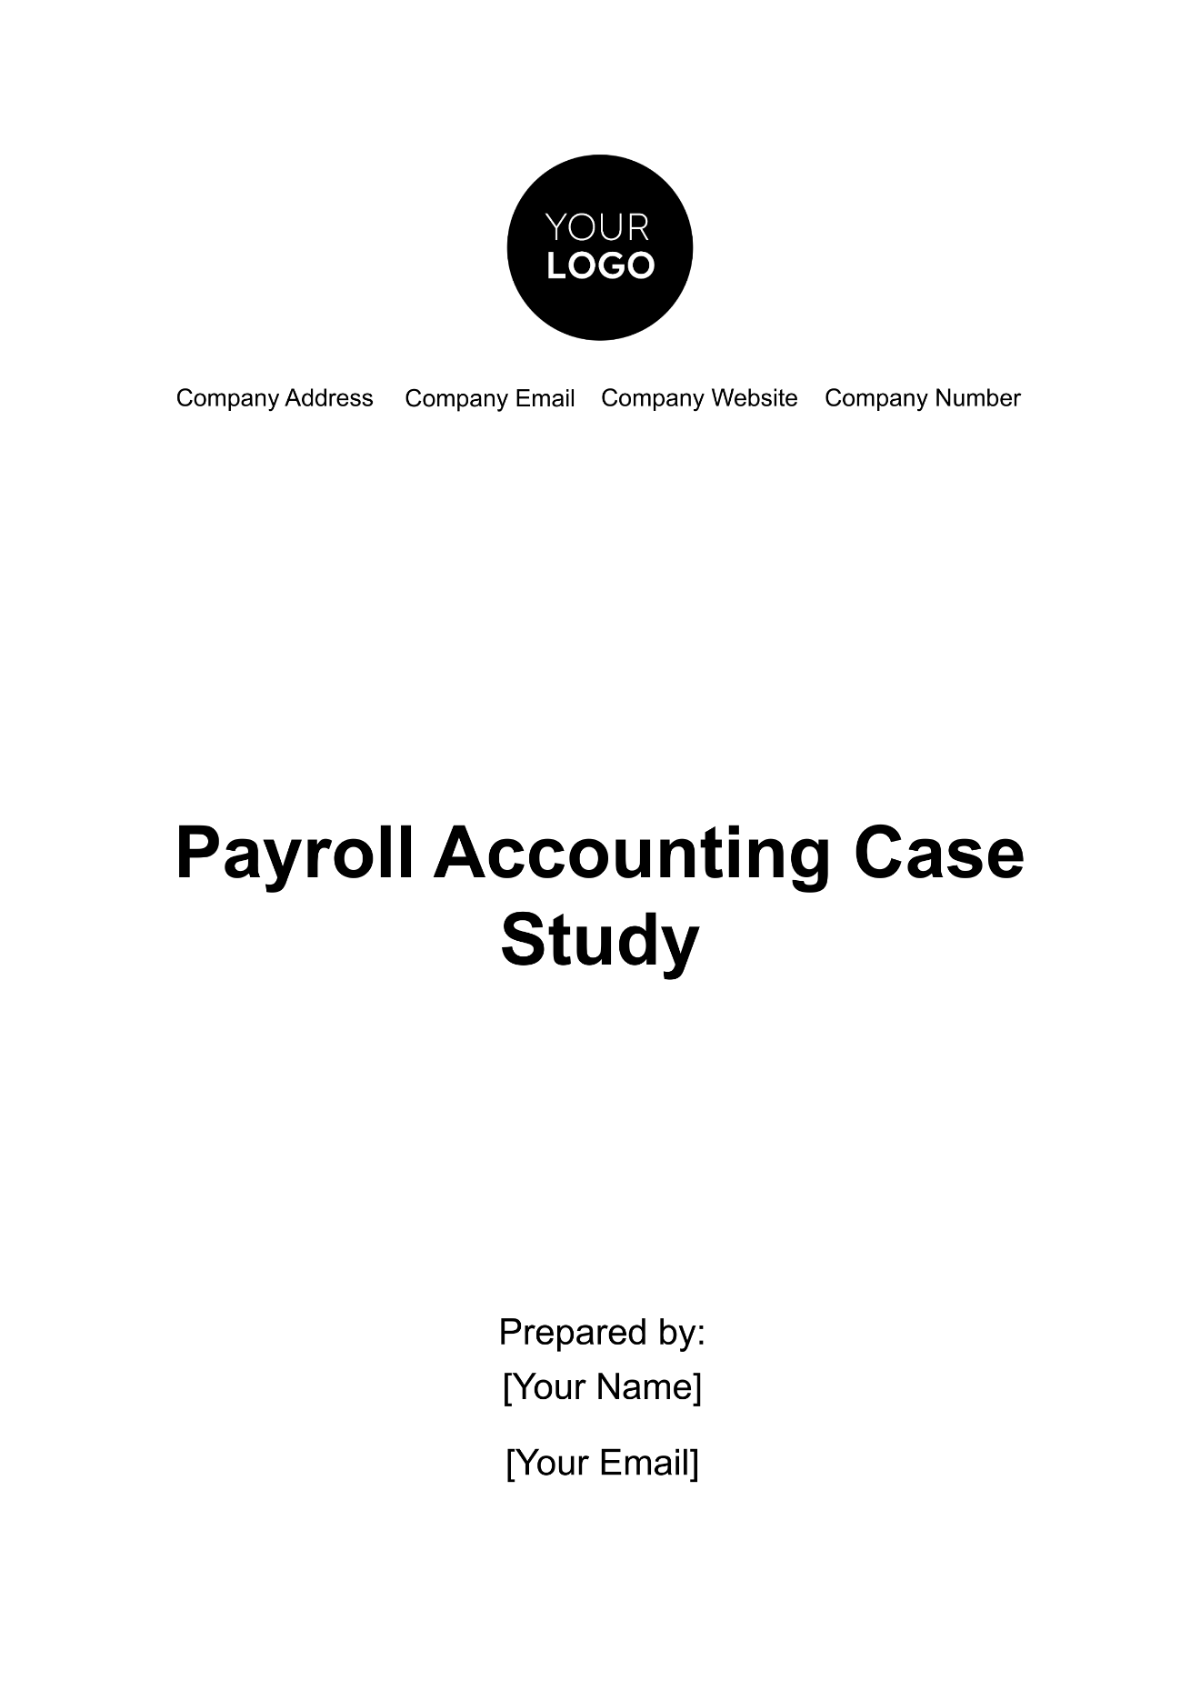 Payroll Accounting Case Study Template